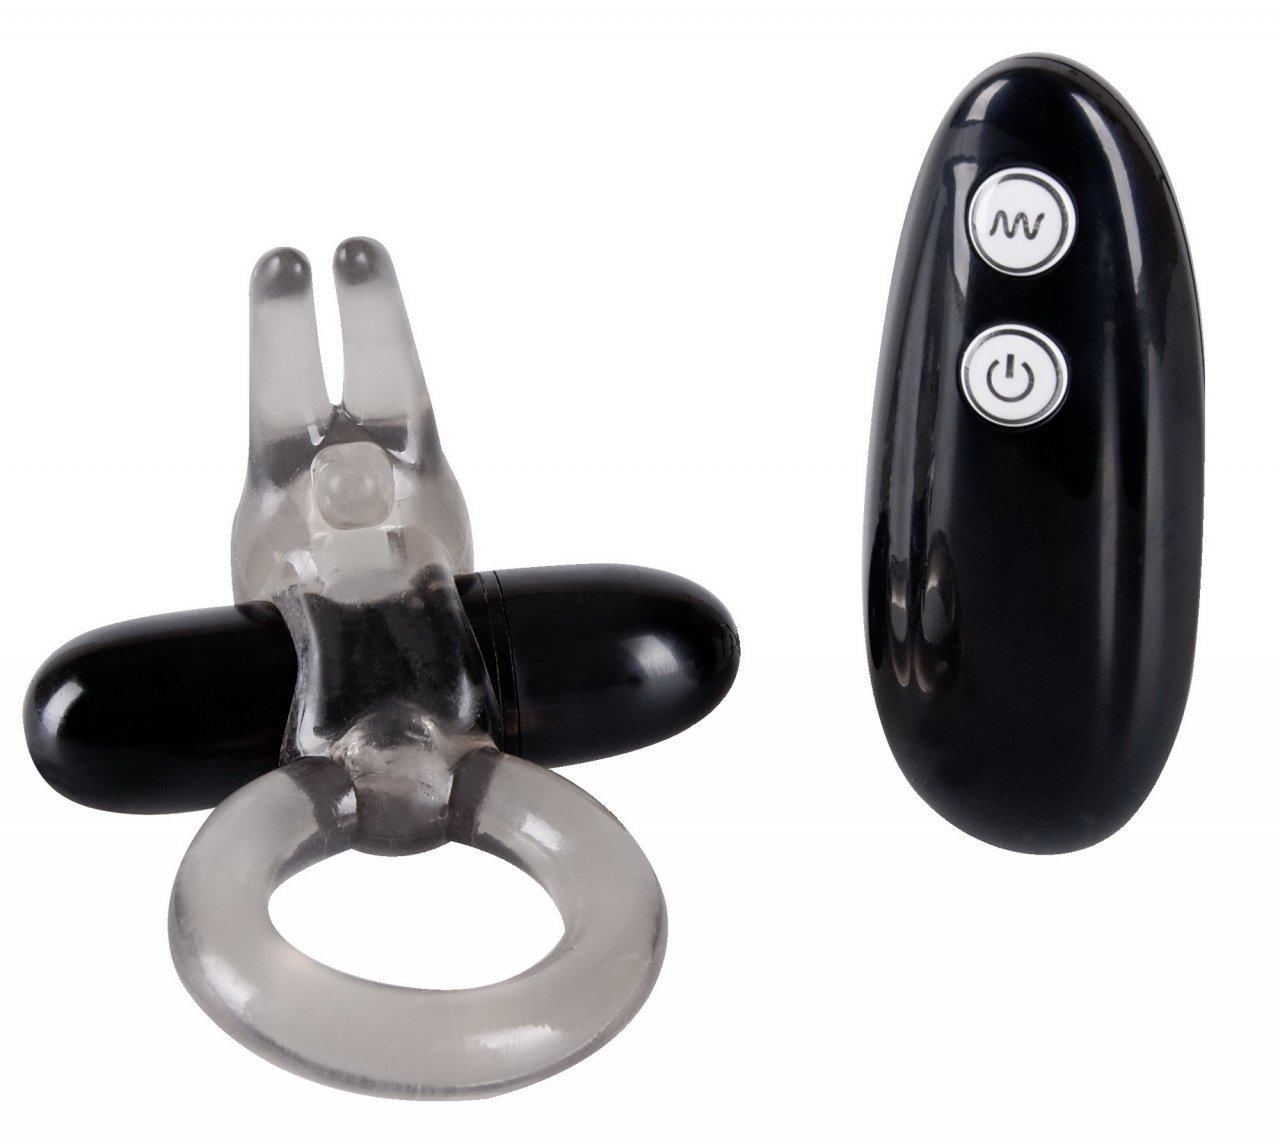 Penis ring Ø 3 cm with vibro egg and clitoris irritant arm